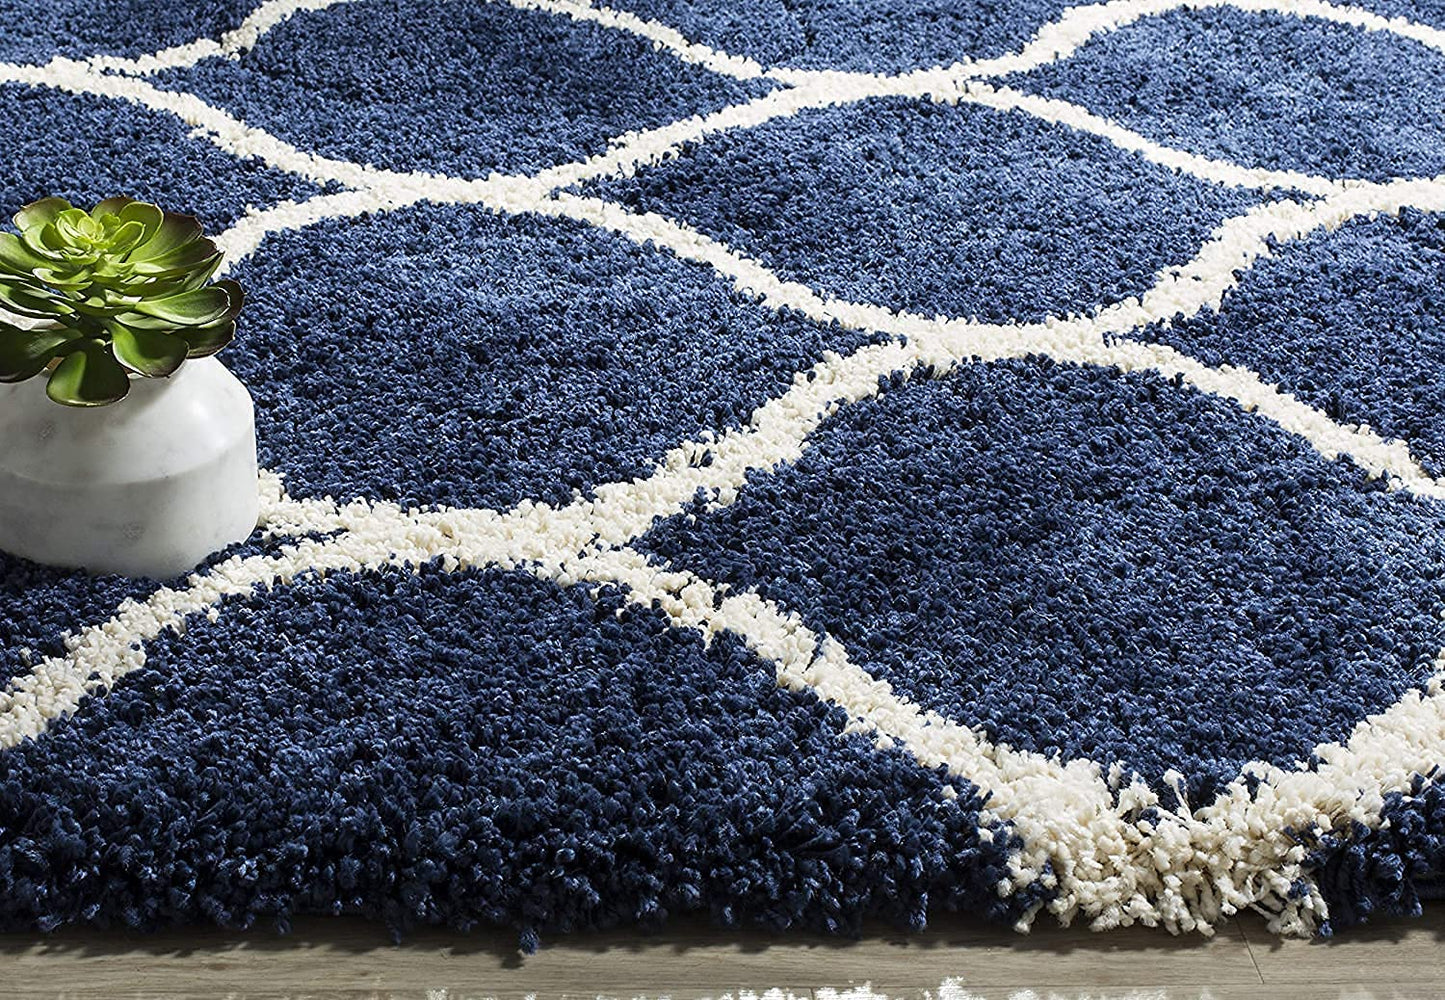 Kashyapa Rugs Collection- Micro Moroccan Lattice Carpet In Cream And Blue. | Carpet for Living Room